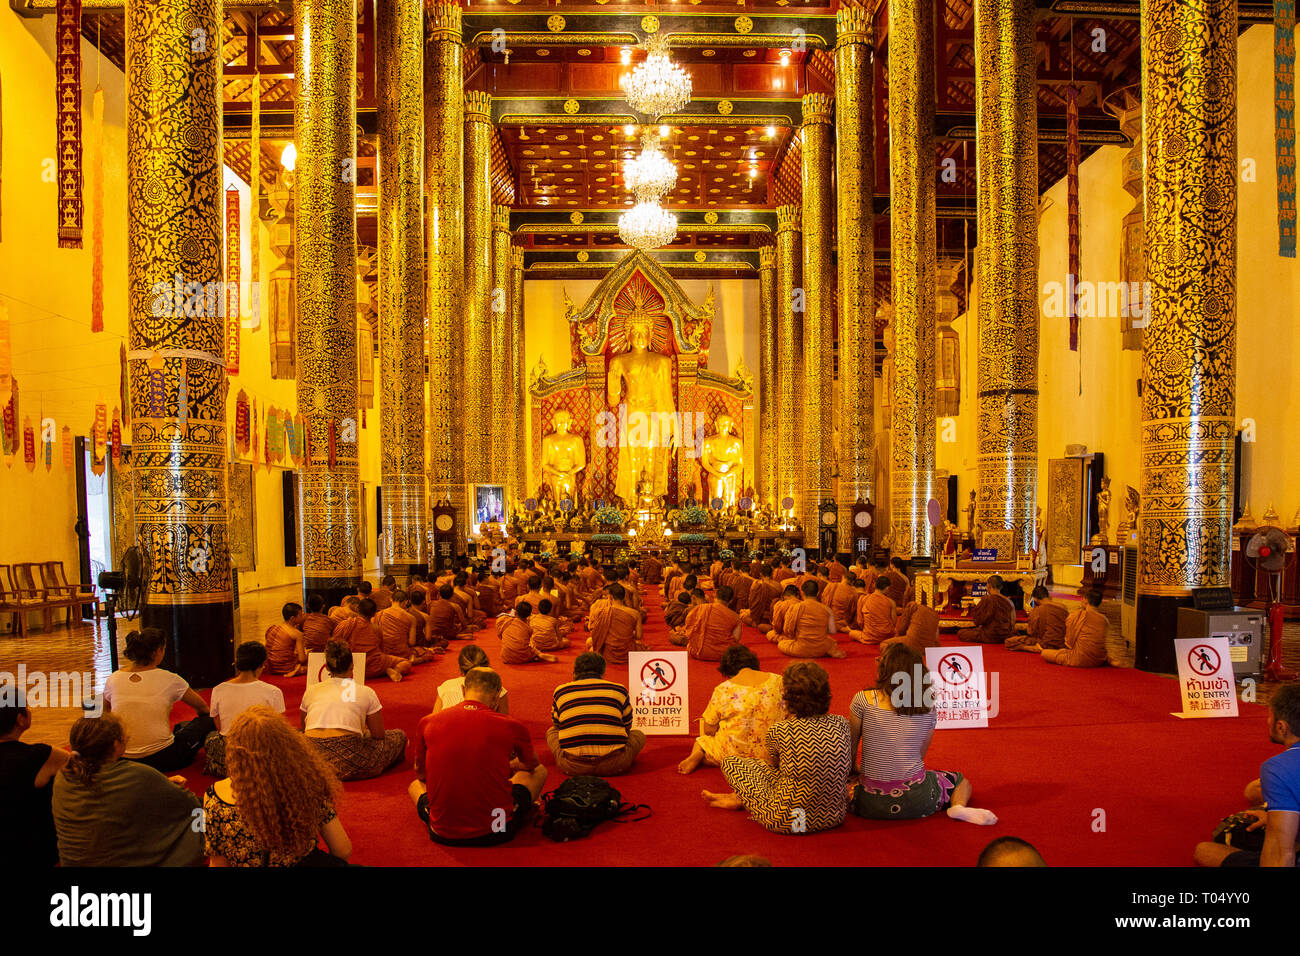 Monks praying at Wat Chedi Luang temple in Chiang Mai, Thailand. Stock Photo